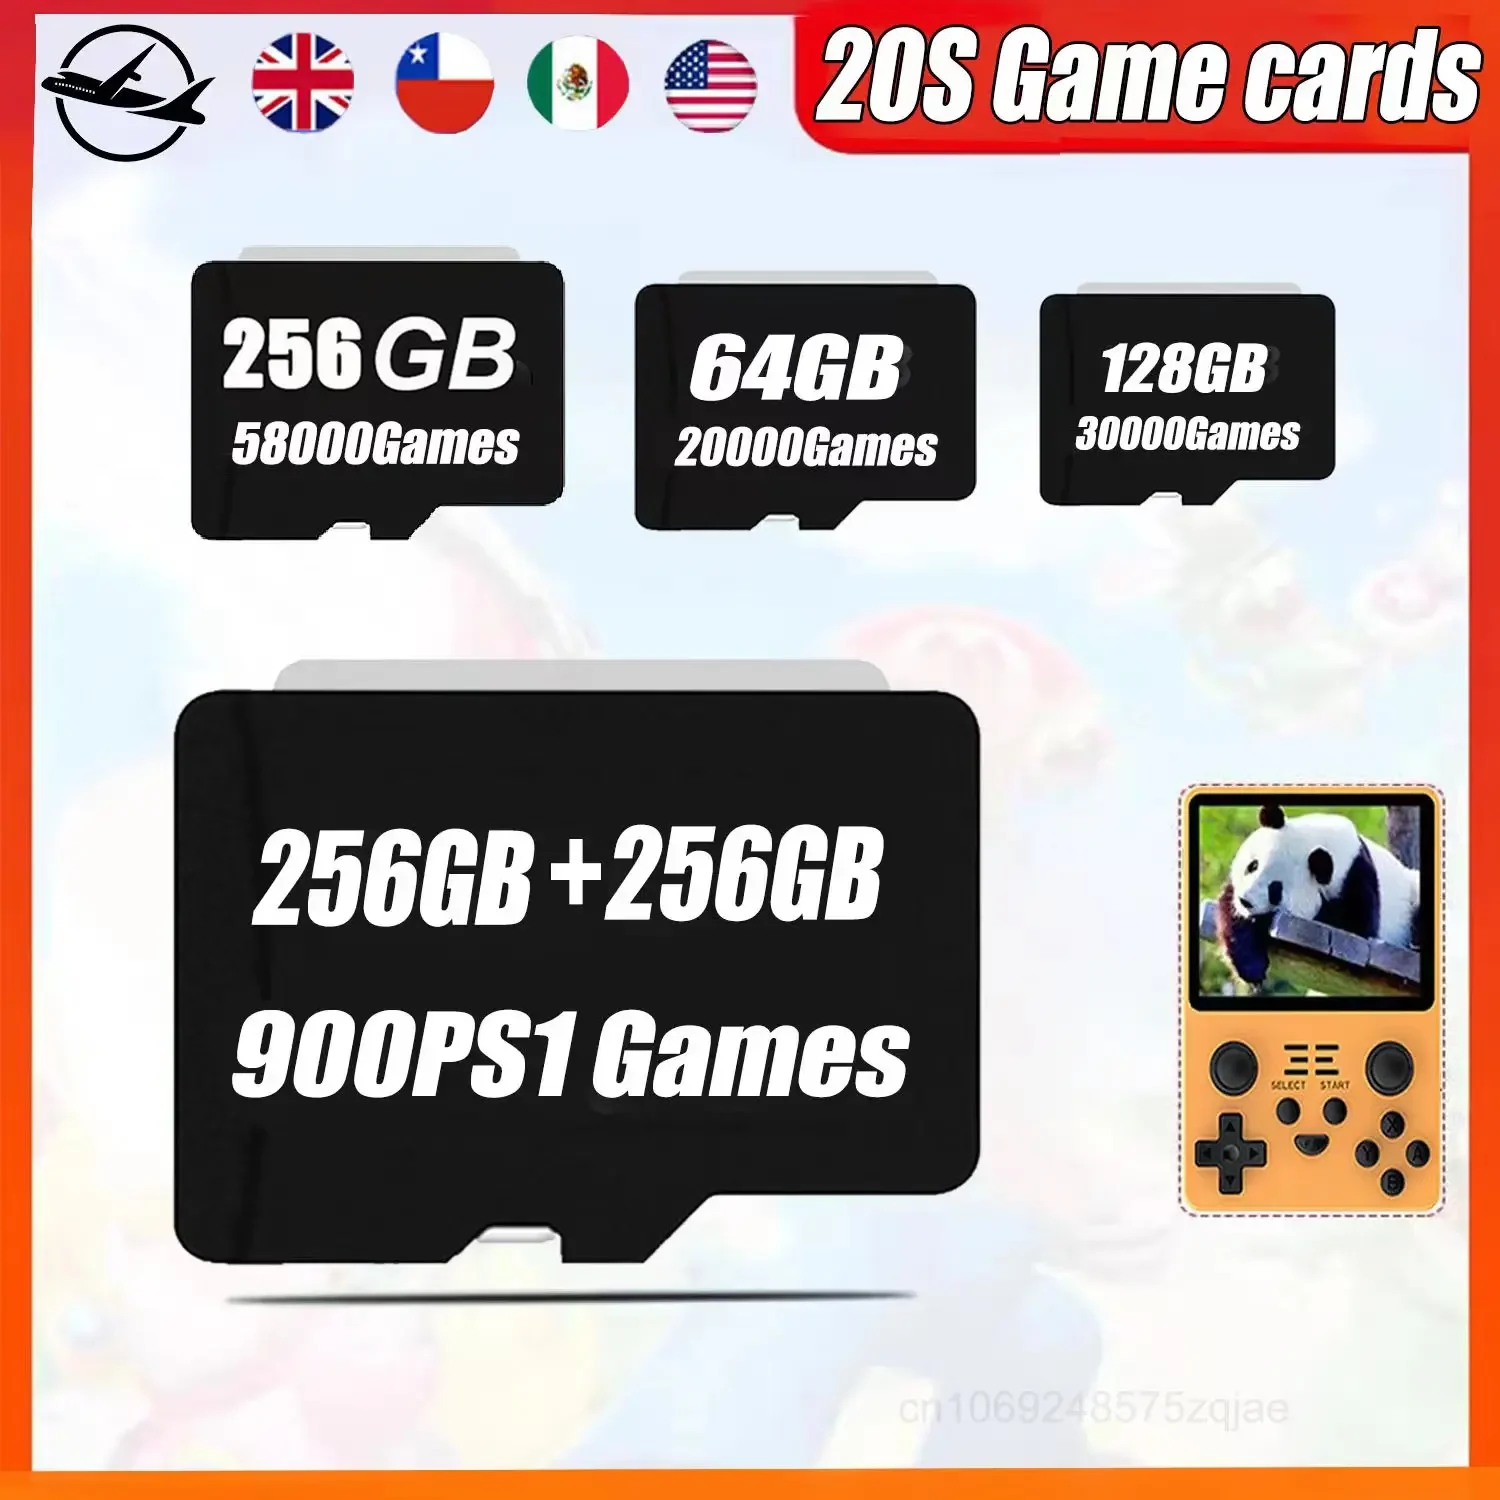 

PowKiddy RGB20S Mamory Card Sd Tf Card Retro Handheld Game Console 256G 900 PS1 PSP Games 500 in 1 Card Machine Classic Gaming